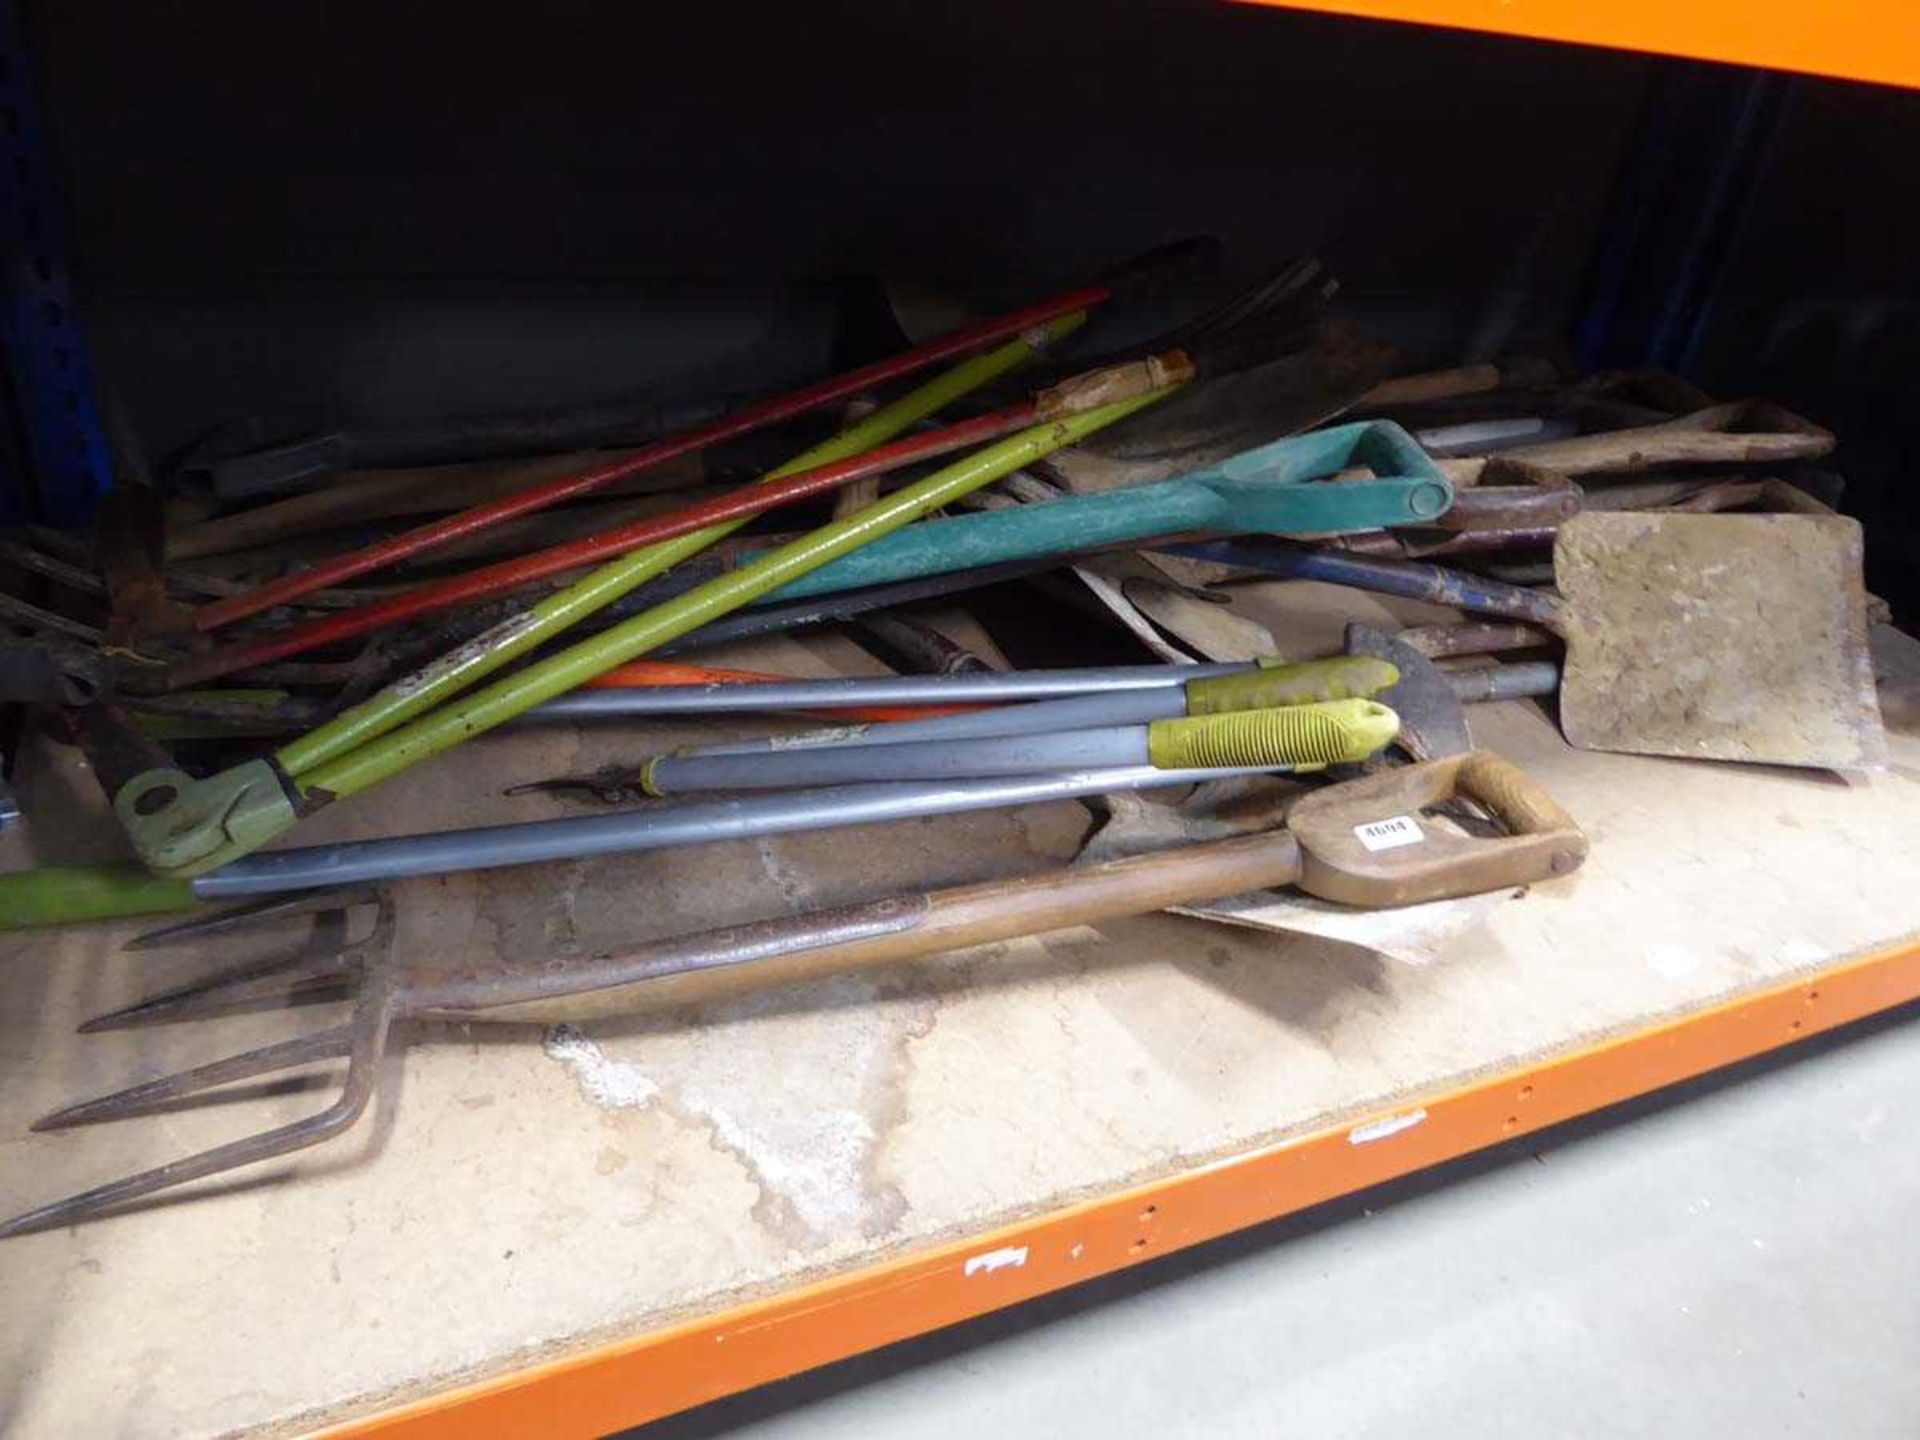 Underbay of assorted tools including forks, shears, edgers, spades etc